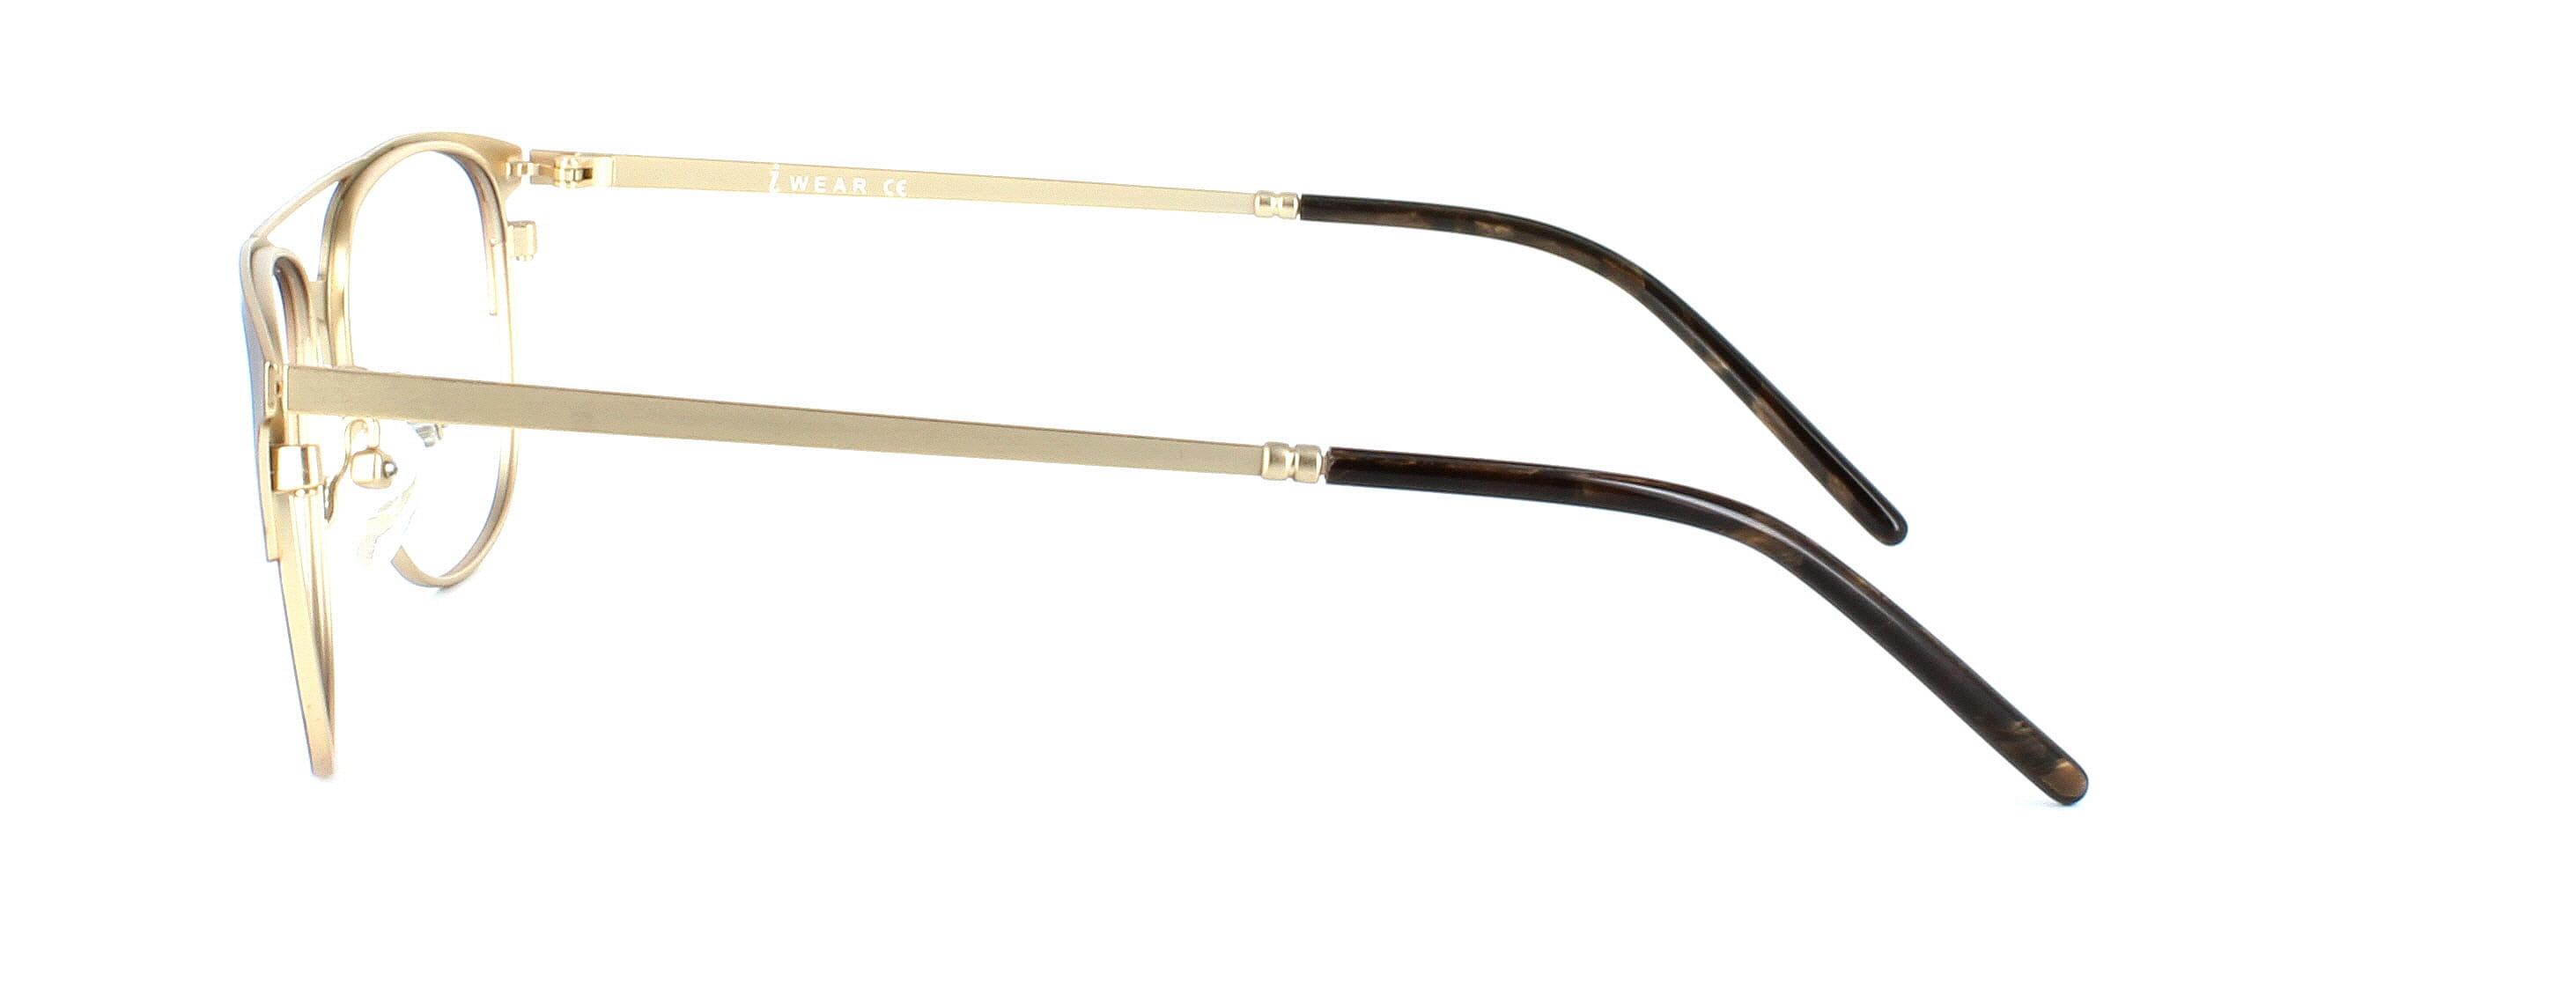 Nyton - Ladies full rim metal glasses in brown and gold - image view 2